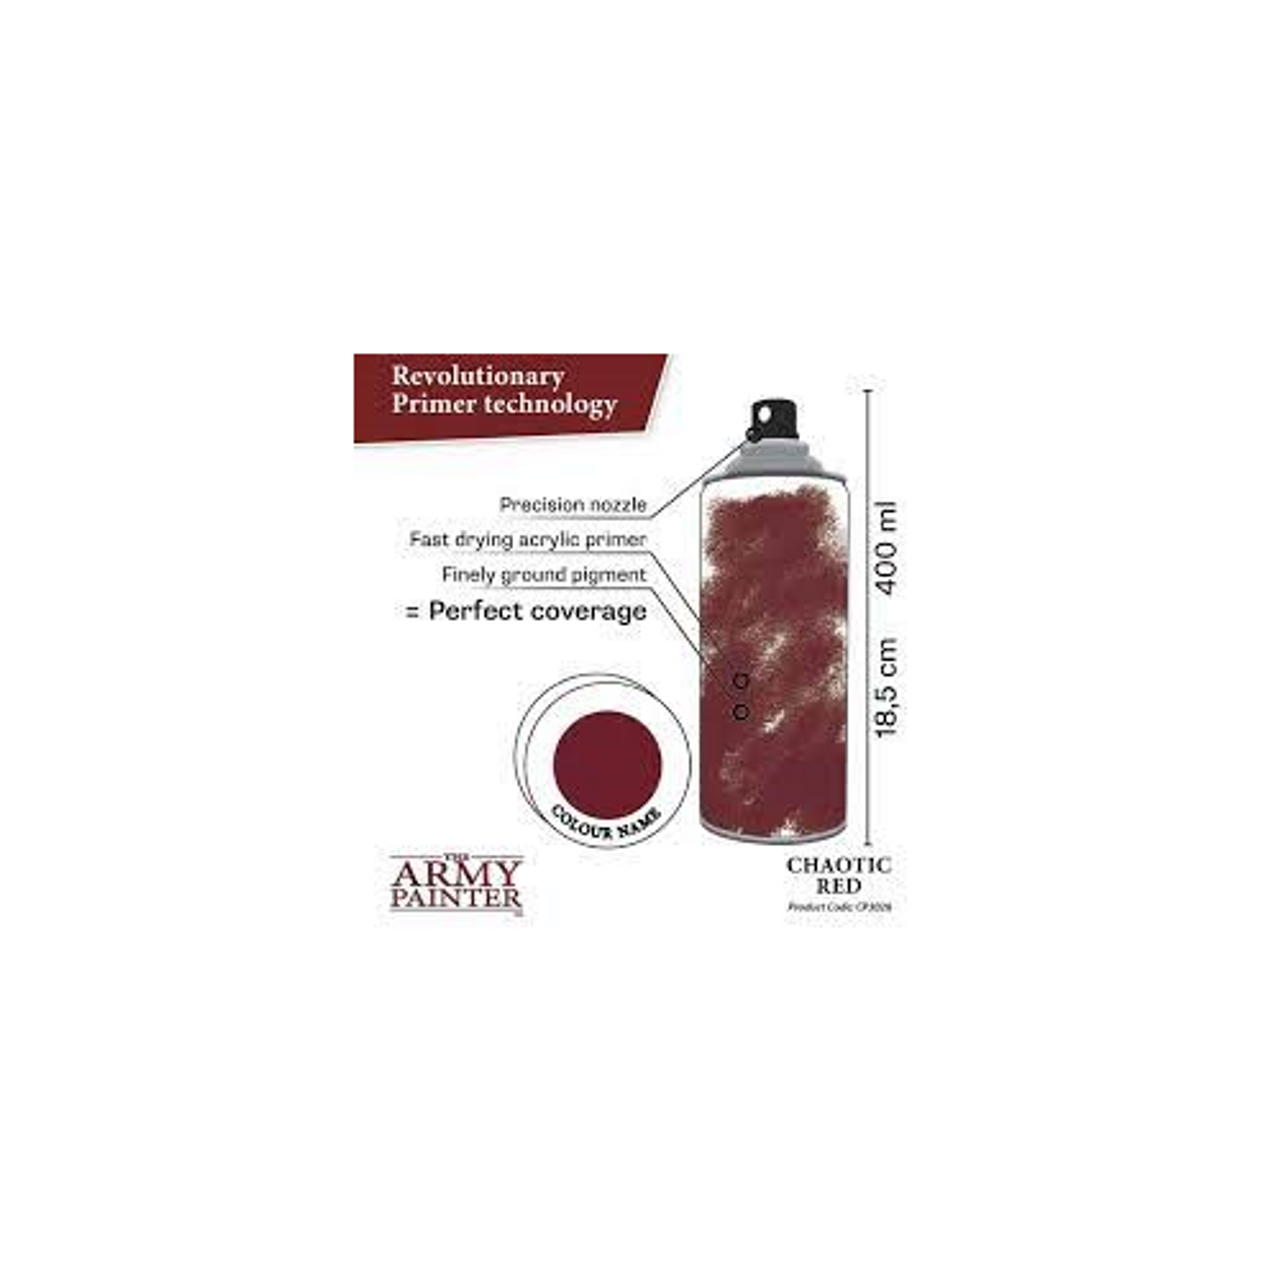 The Army Painter Primer Dragon Red 400ml Acrylic Spray for